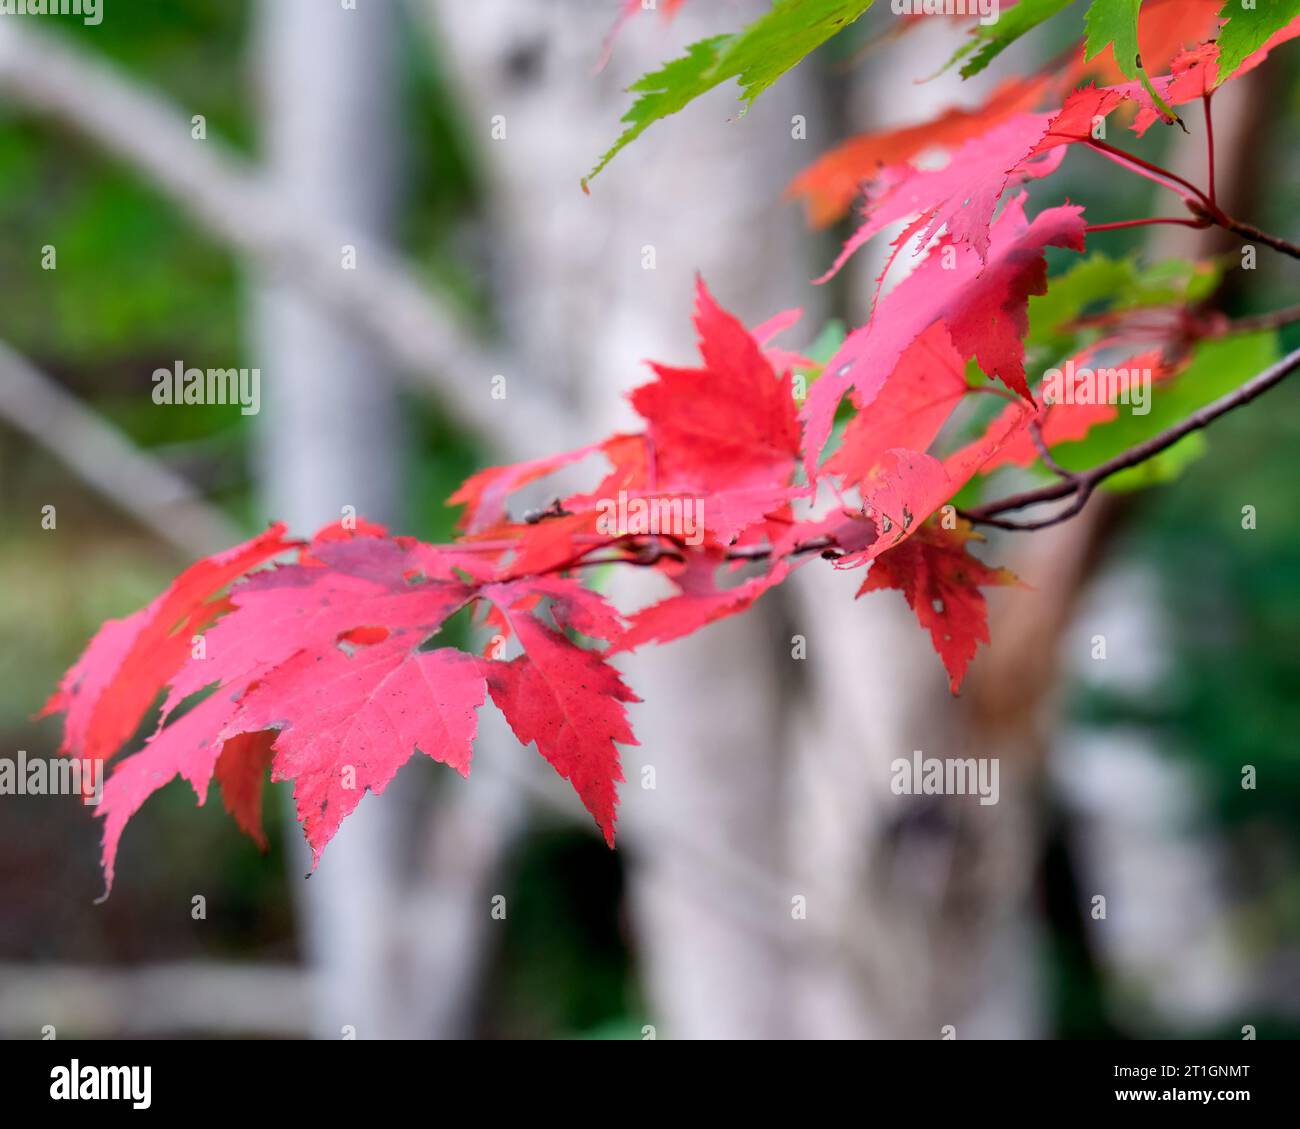 Red maple leaves contrast against green leaves and the white barck of birch trees. Stock Photo